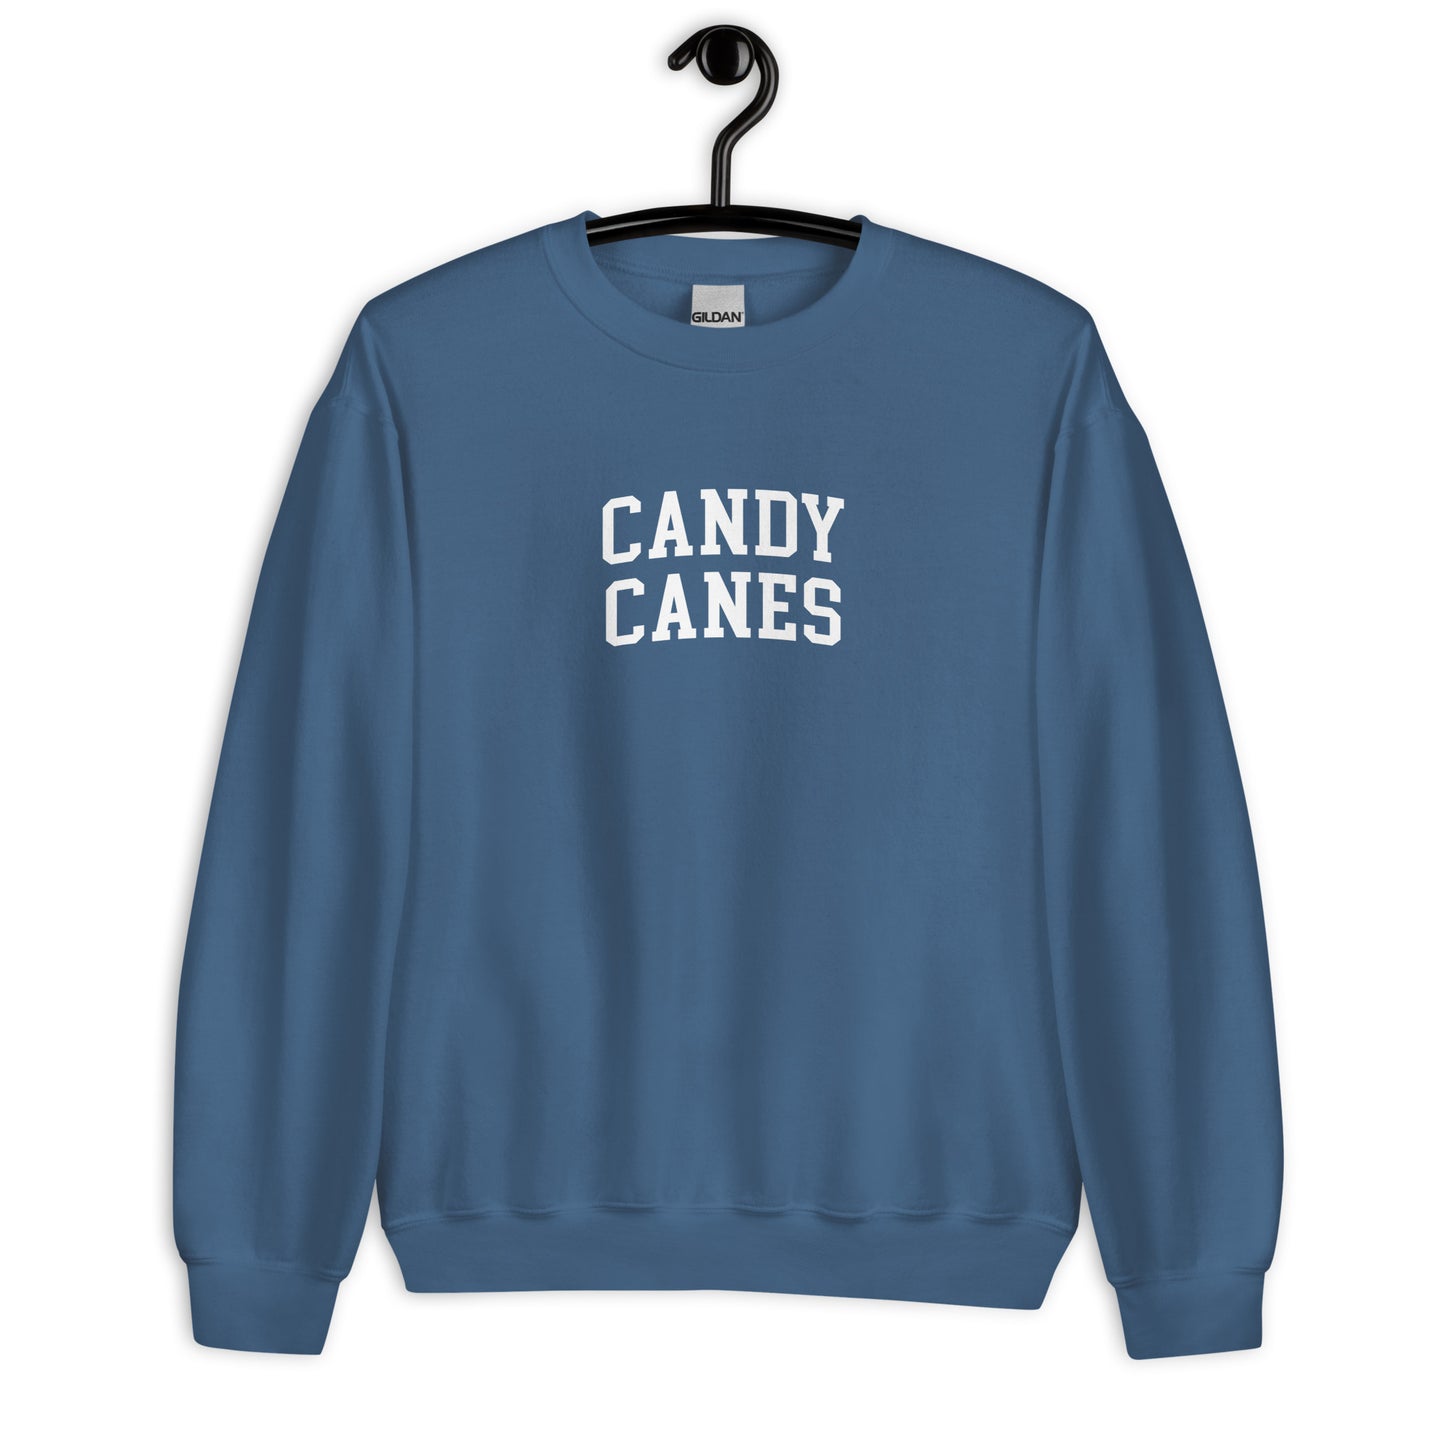 Candy Canes Sweatshirt - Arched Font